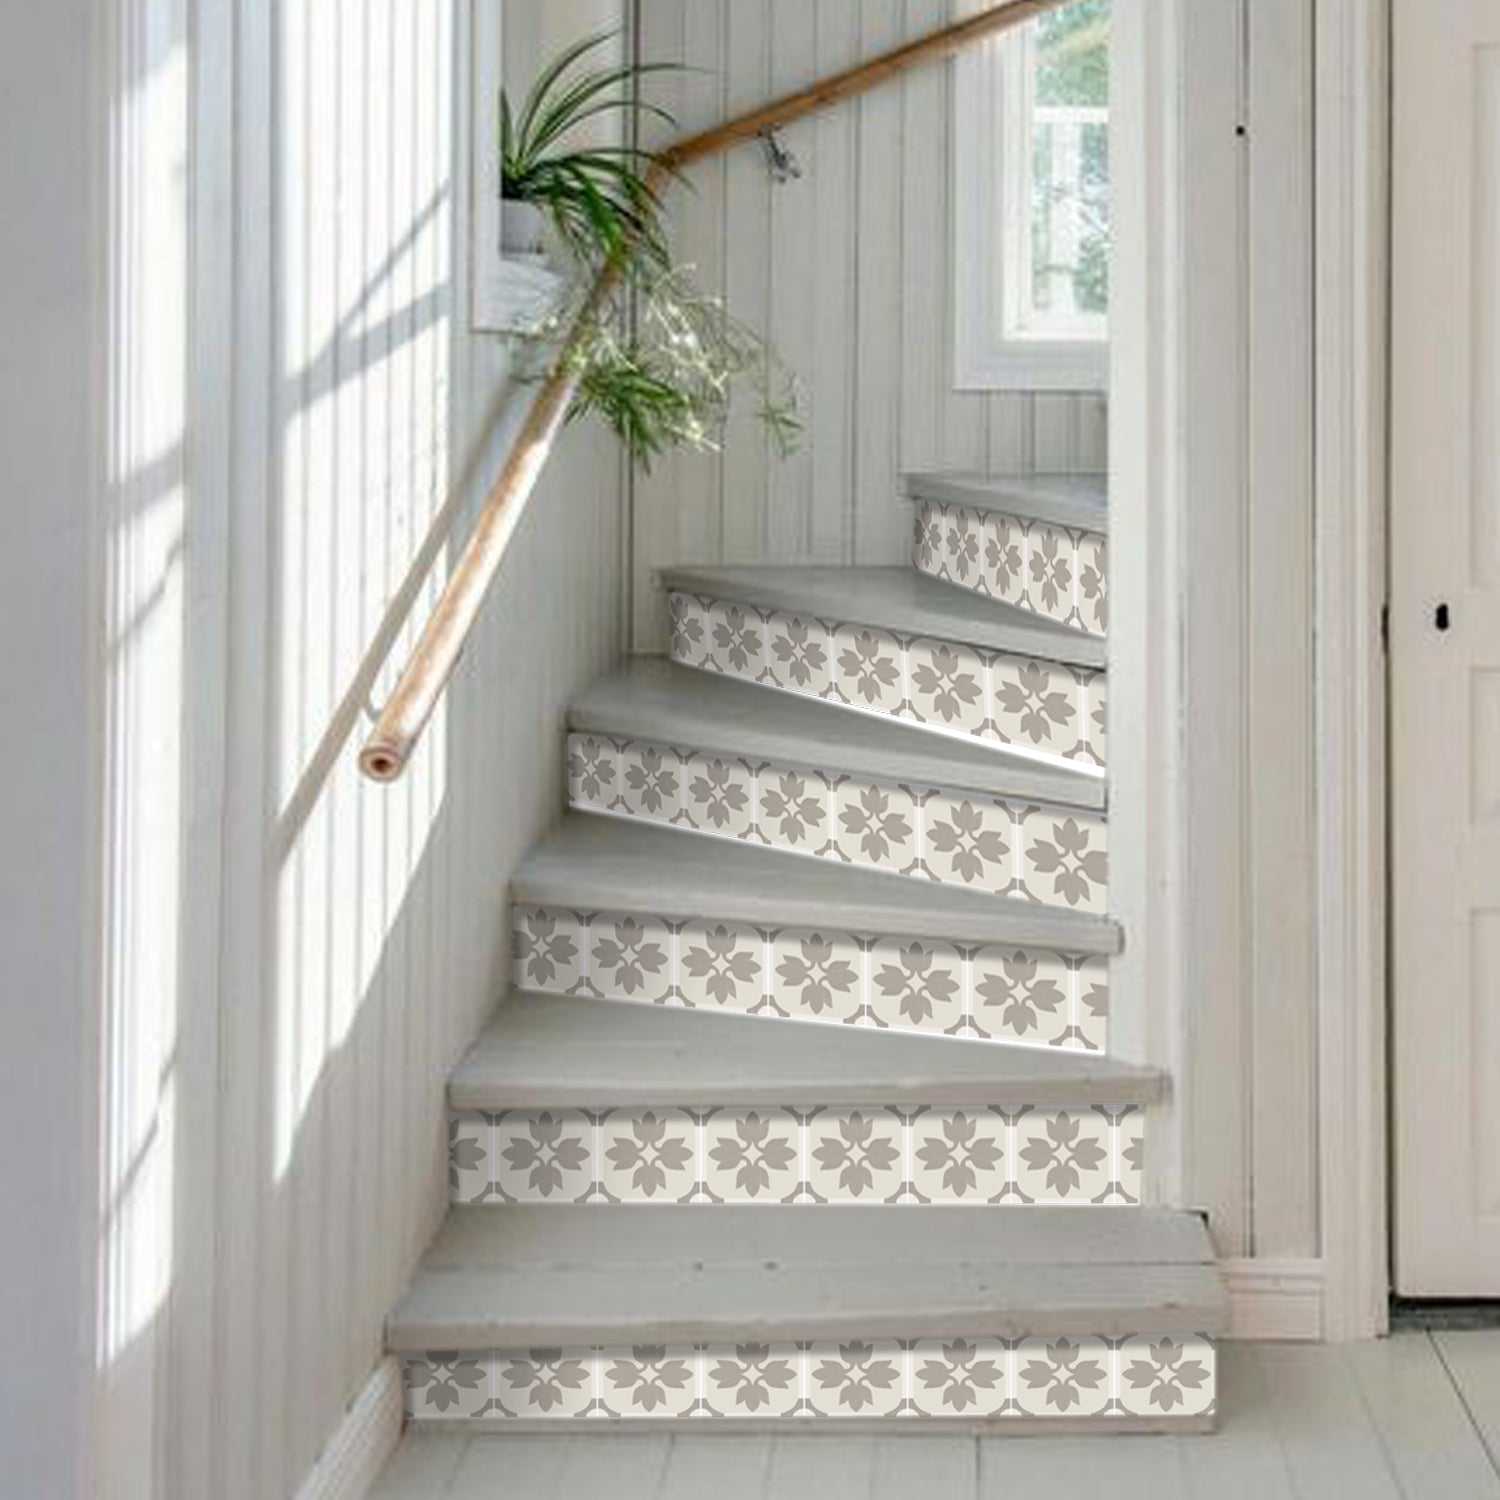 Margot in Taupe Stair Riser Stickers